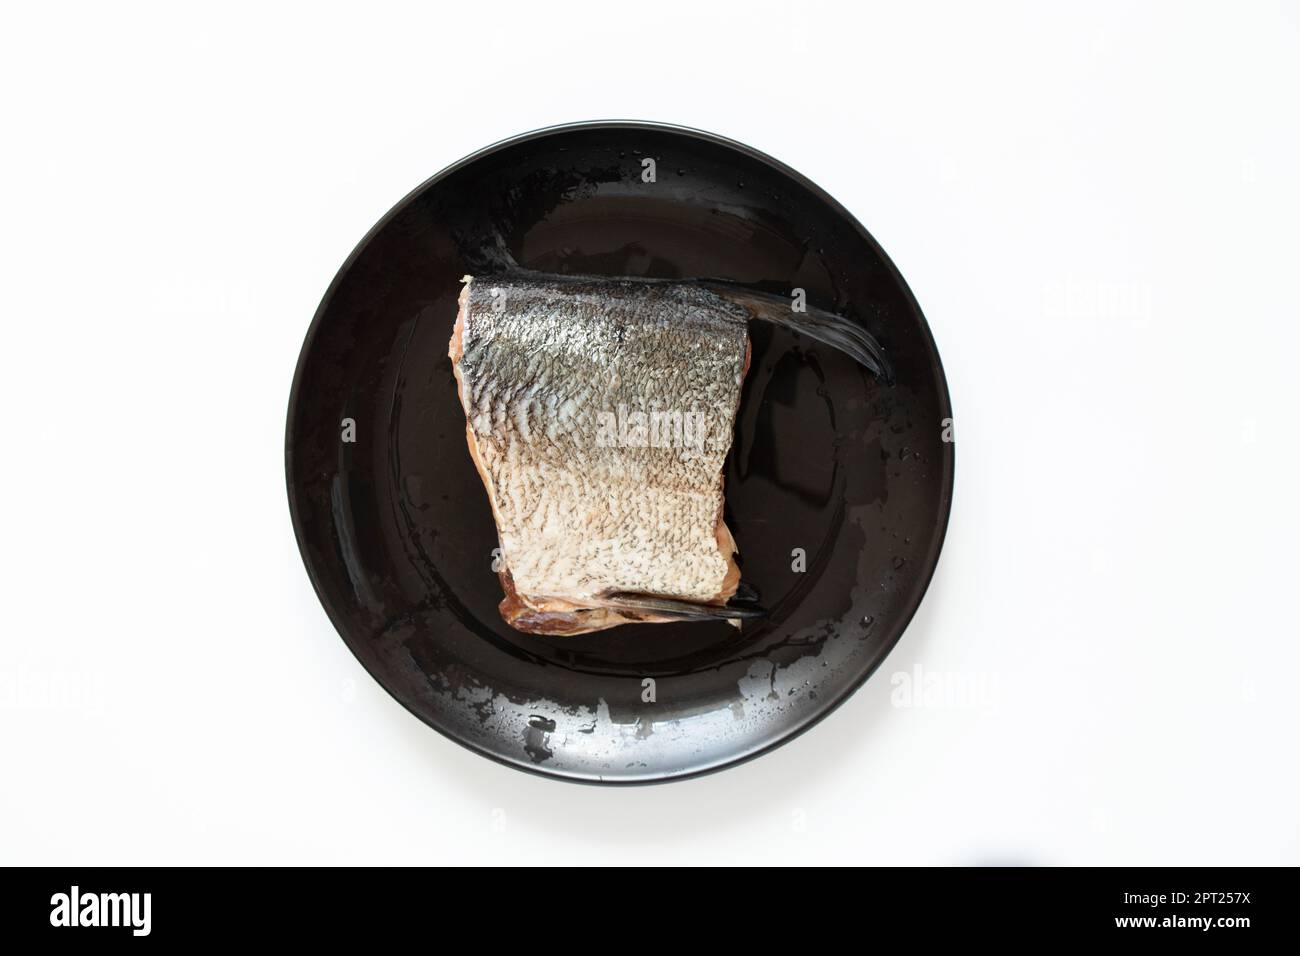 A raw piece of silver carp lies on a black plate on a white background Stock Photo